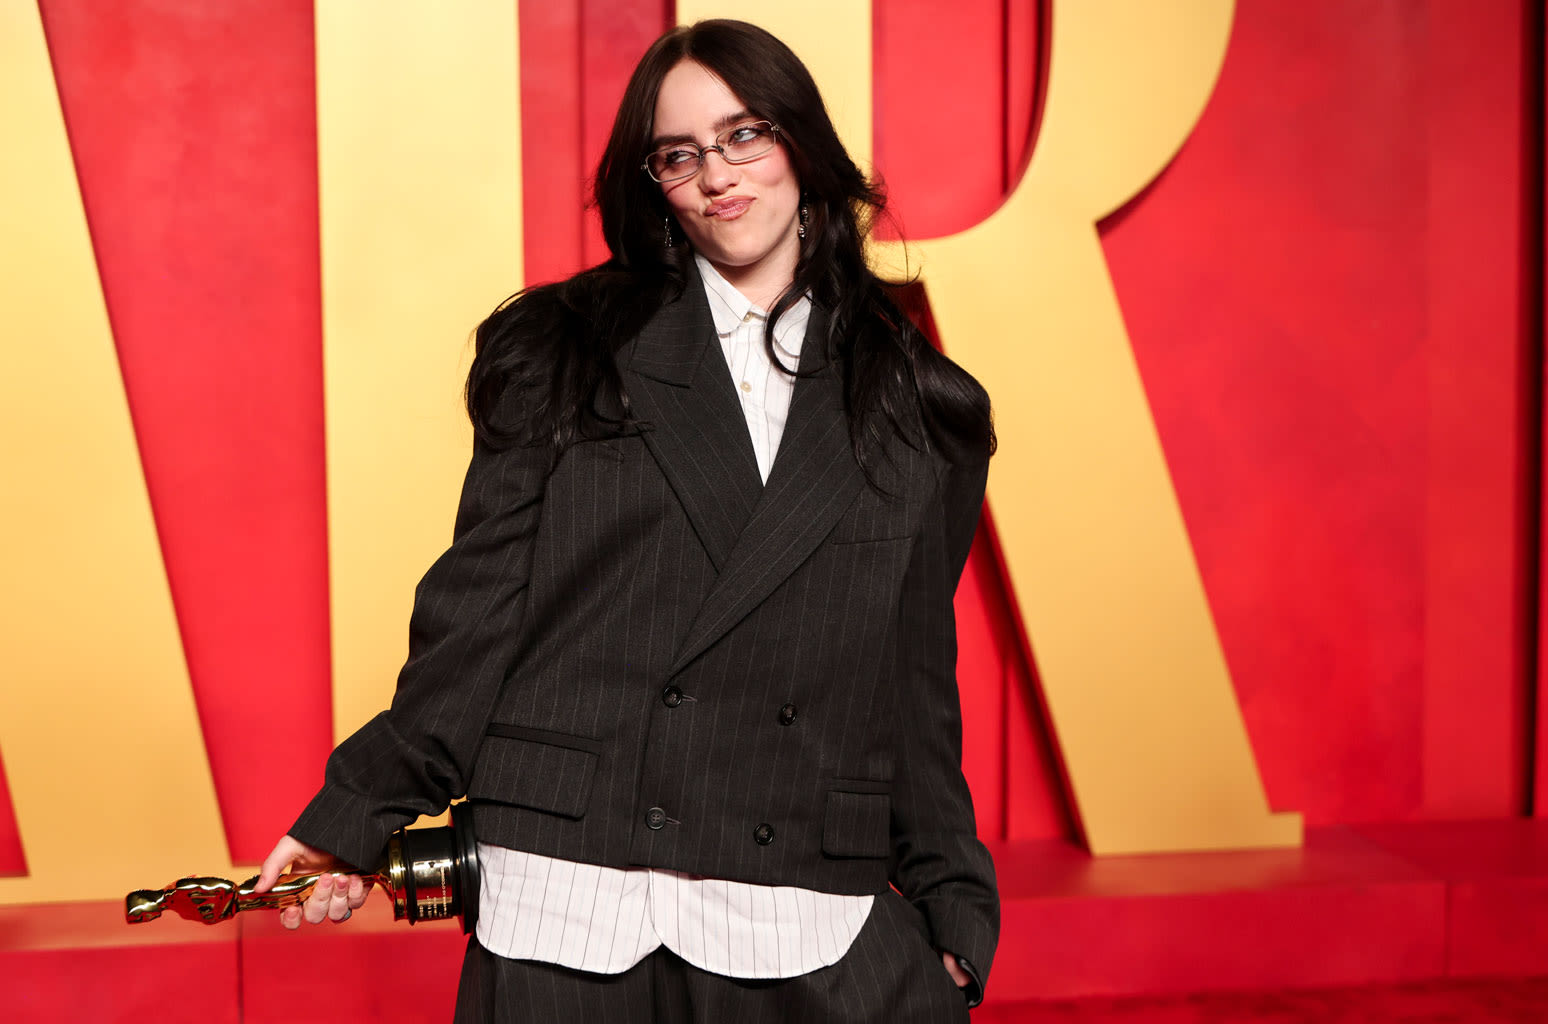 Billie Eilish Reveals She’s ‘Never Been Dumped’: ‘I’ve Only Done the Breaking Up’